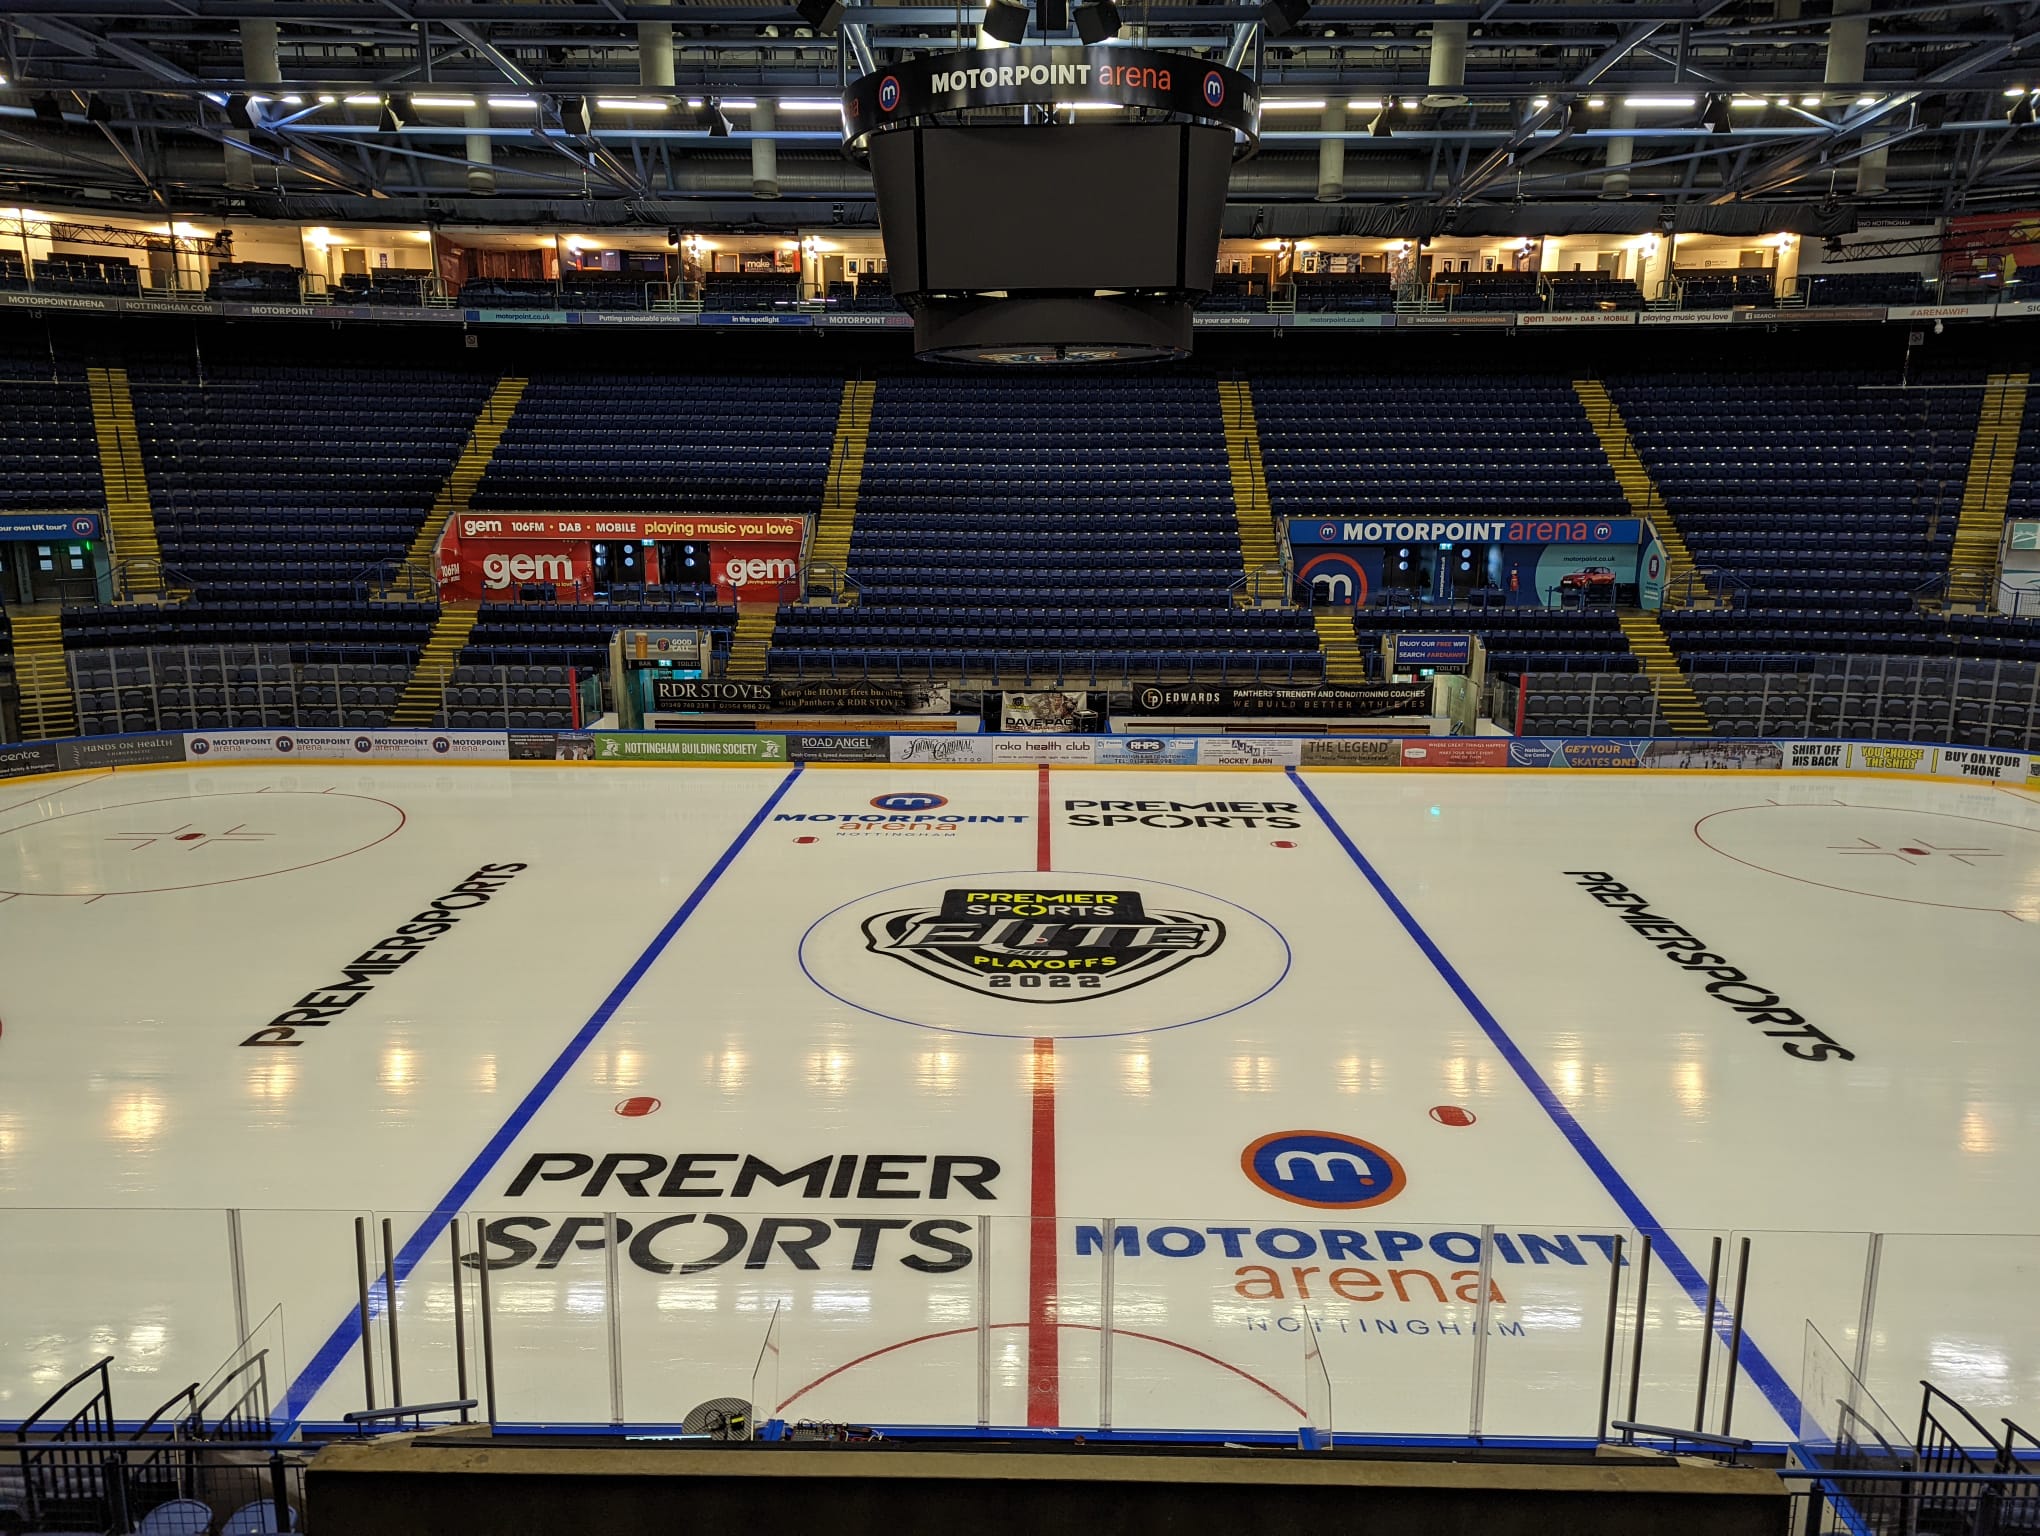 Nottingham's Motorpoint Arena is the centre of attention ahead of the 2021-22 Playoff Finals Weekend (Image: Elite League)